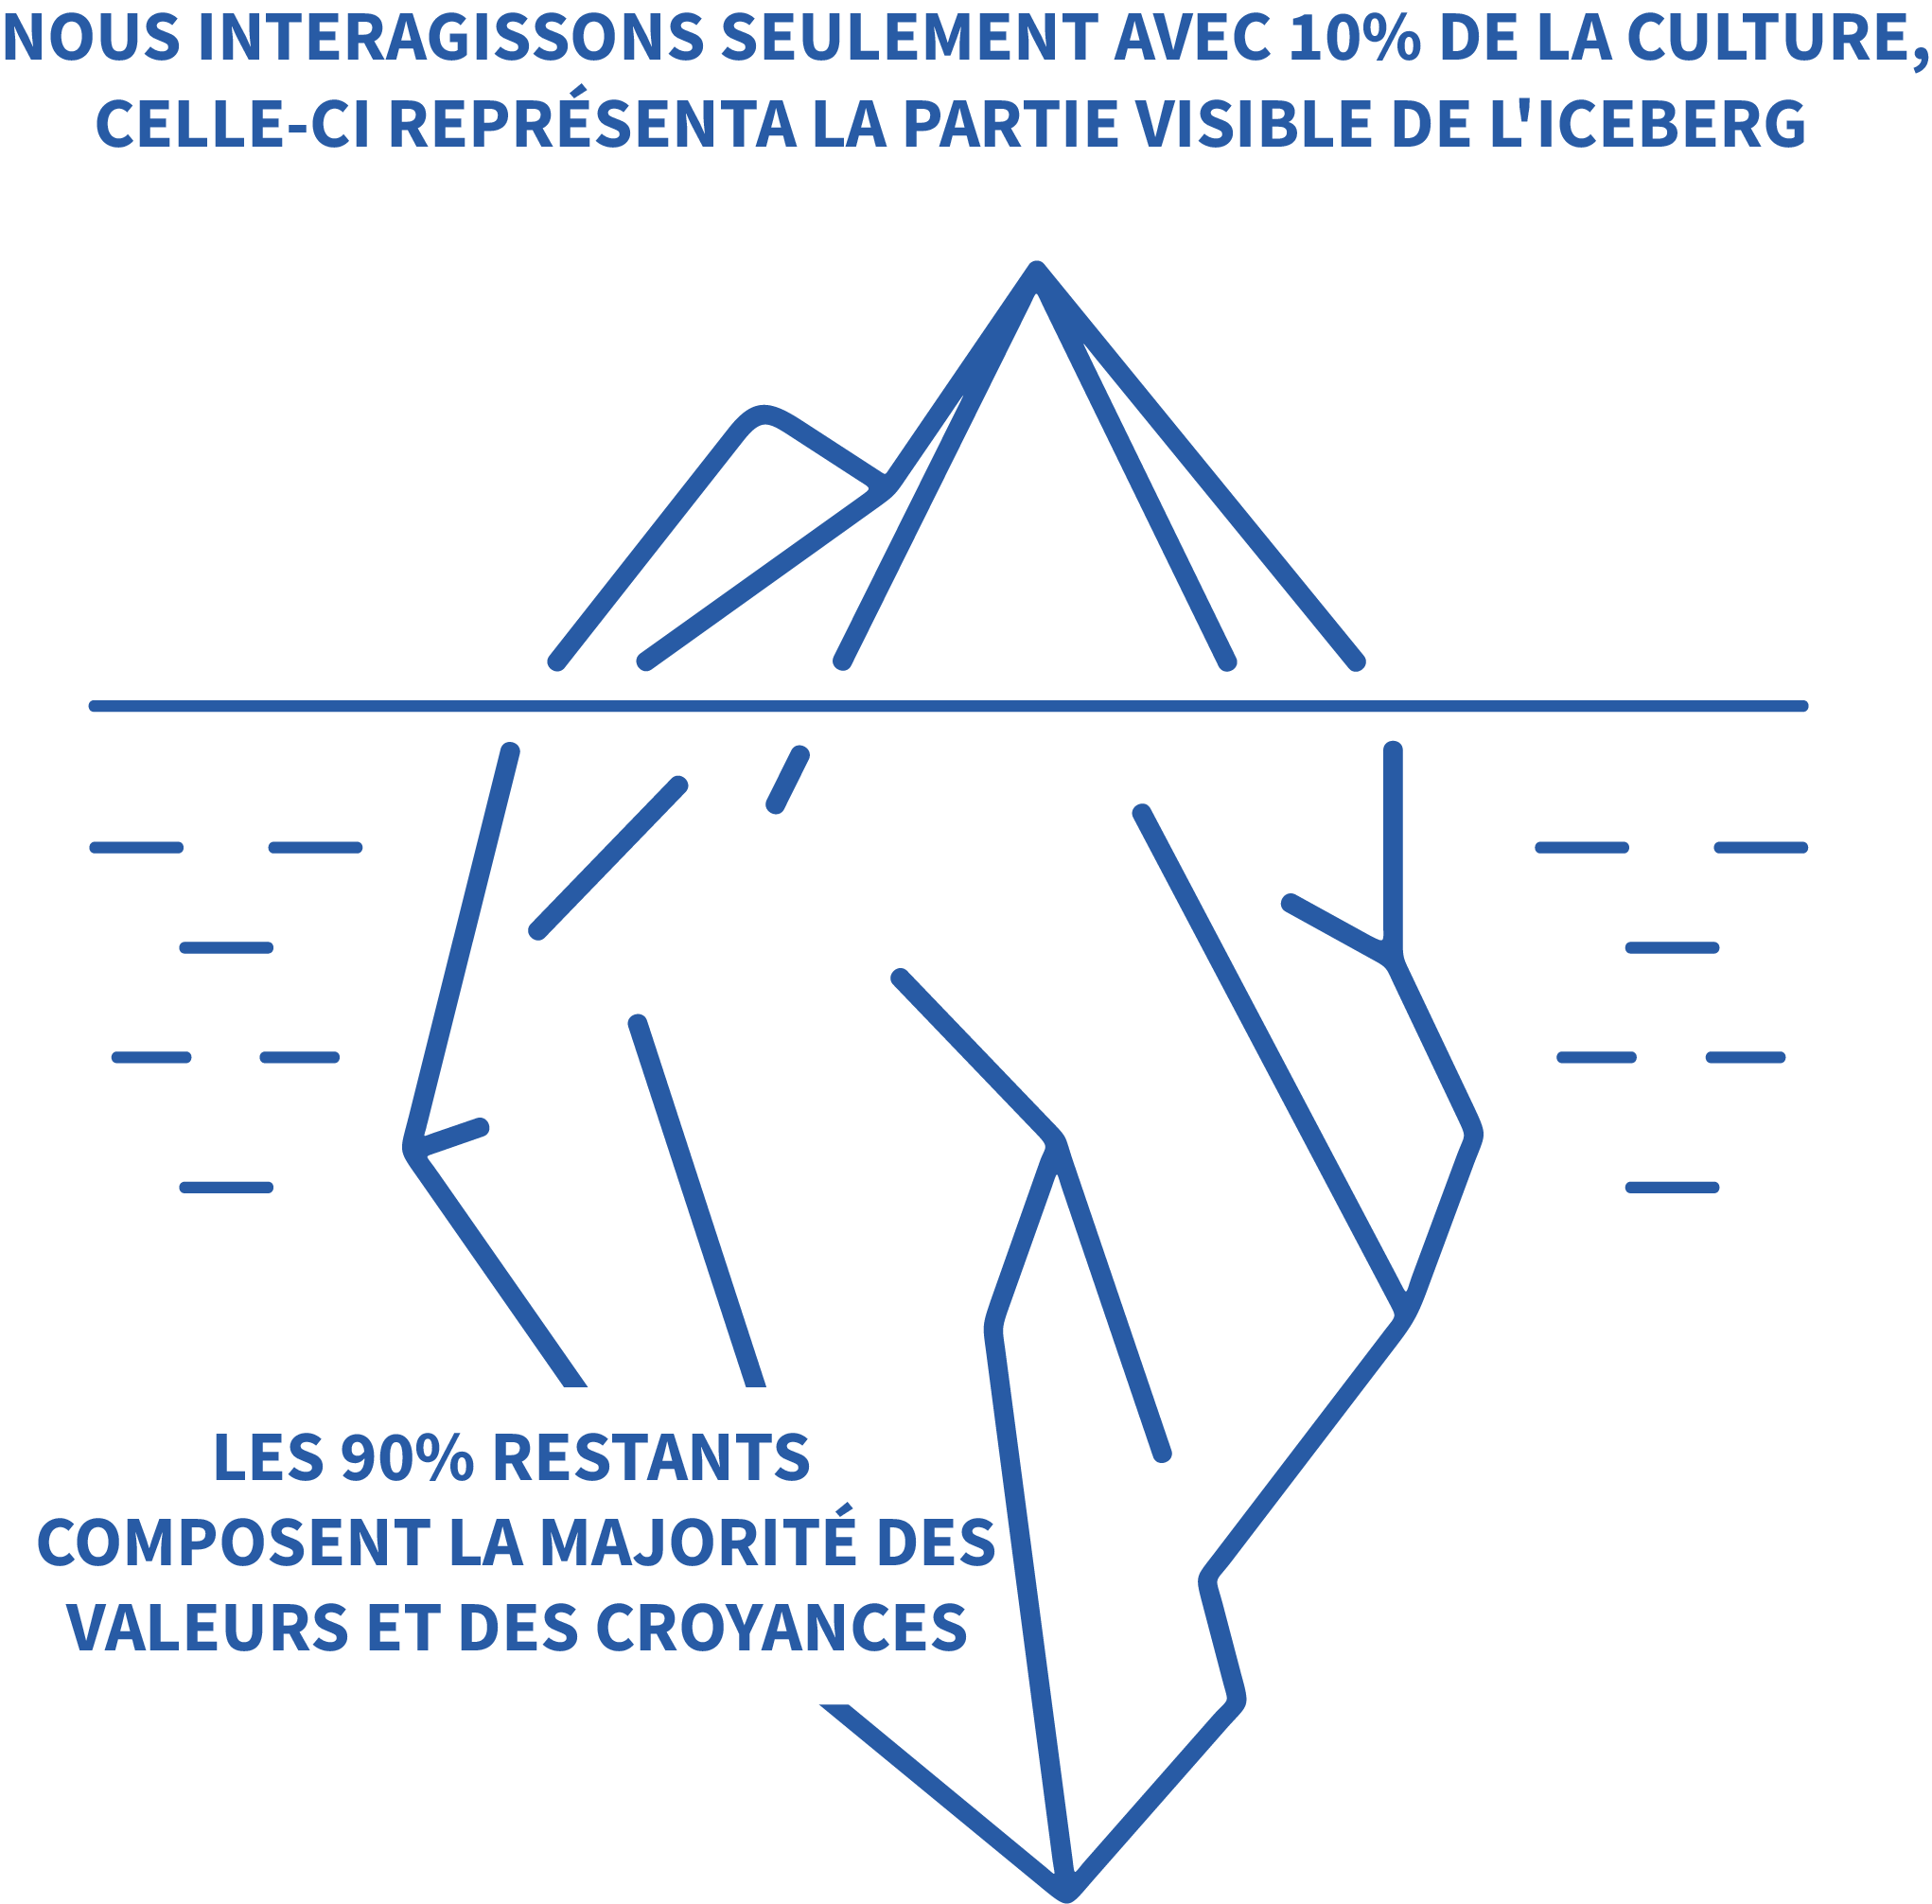 culture iceberg, we interact with 10% of people's culture, the remaining 90% make up the values and beliefs